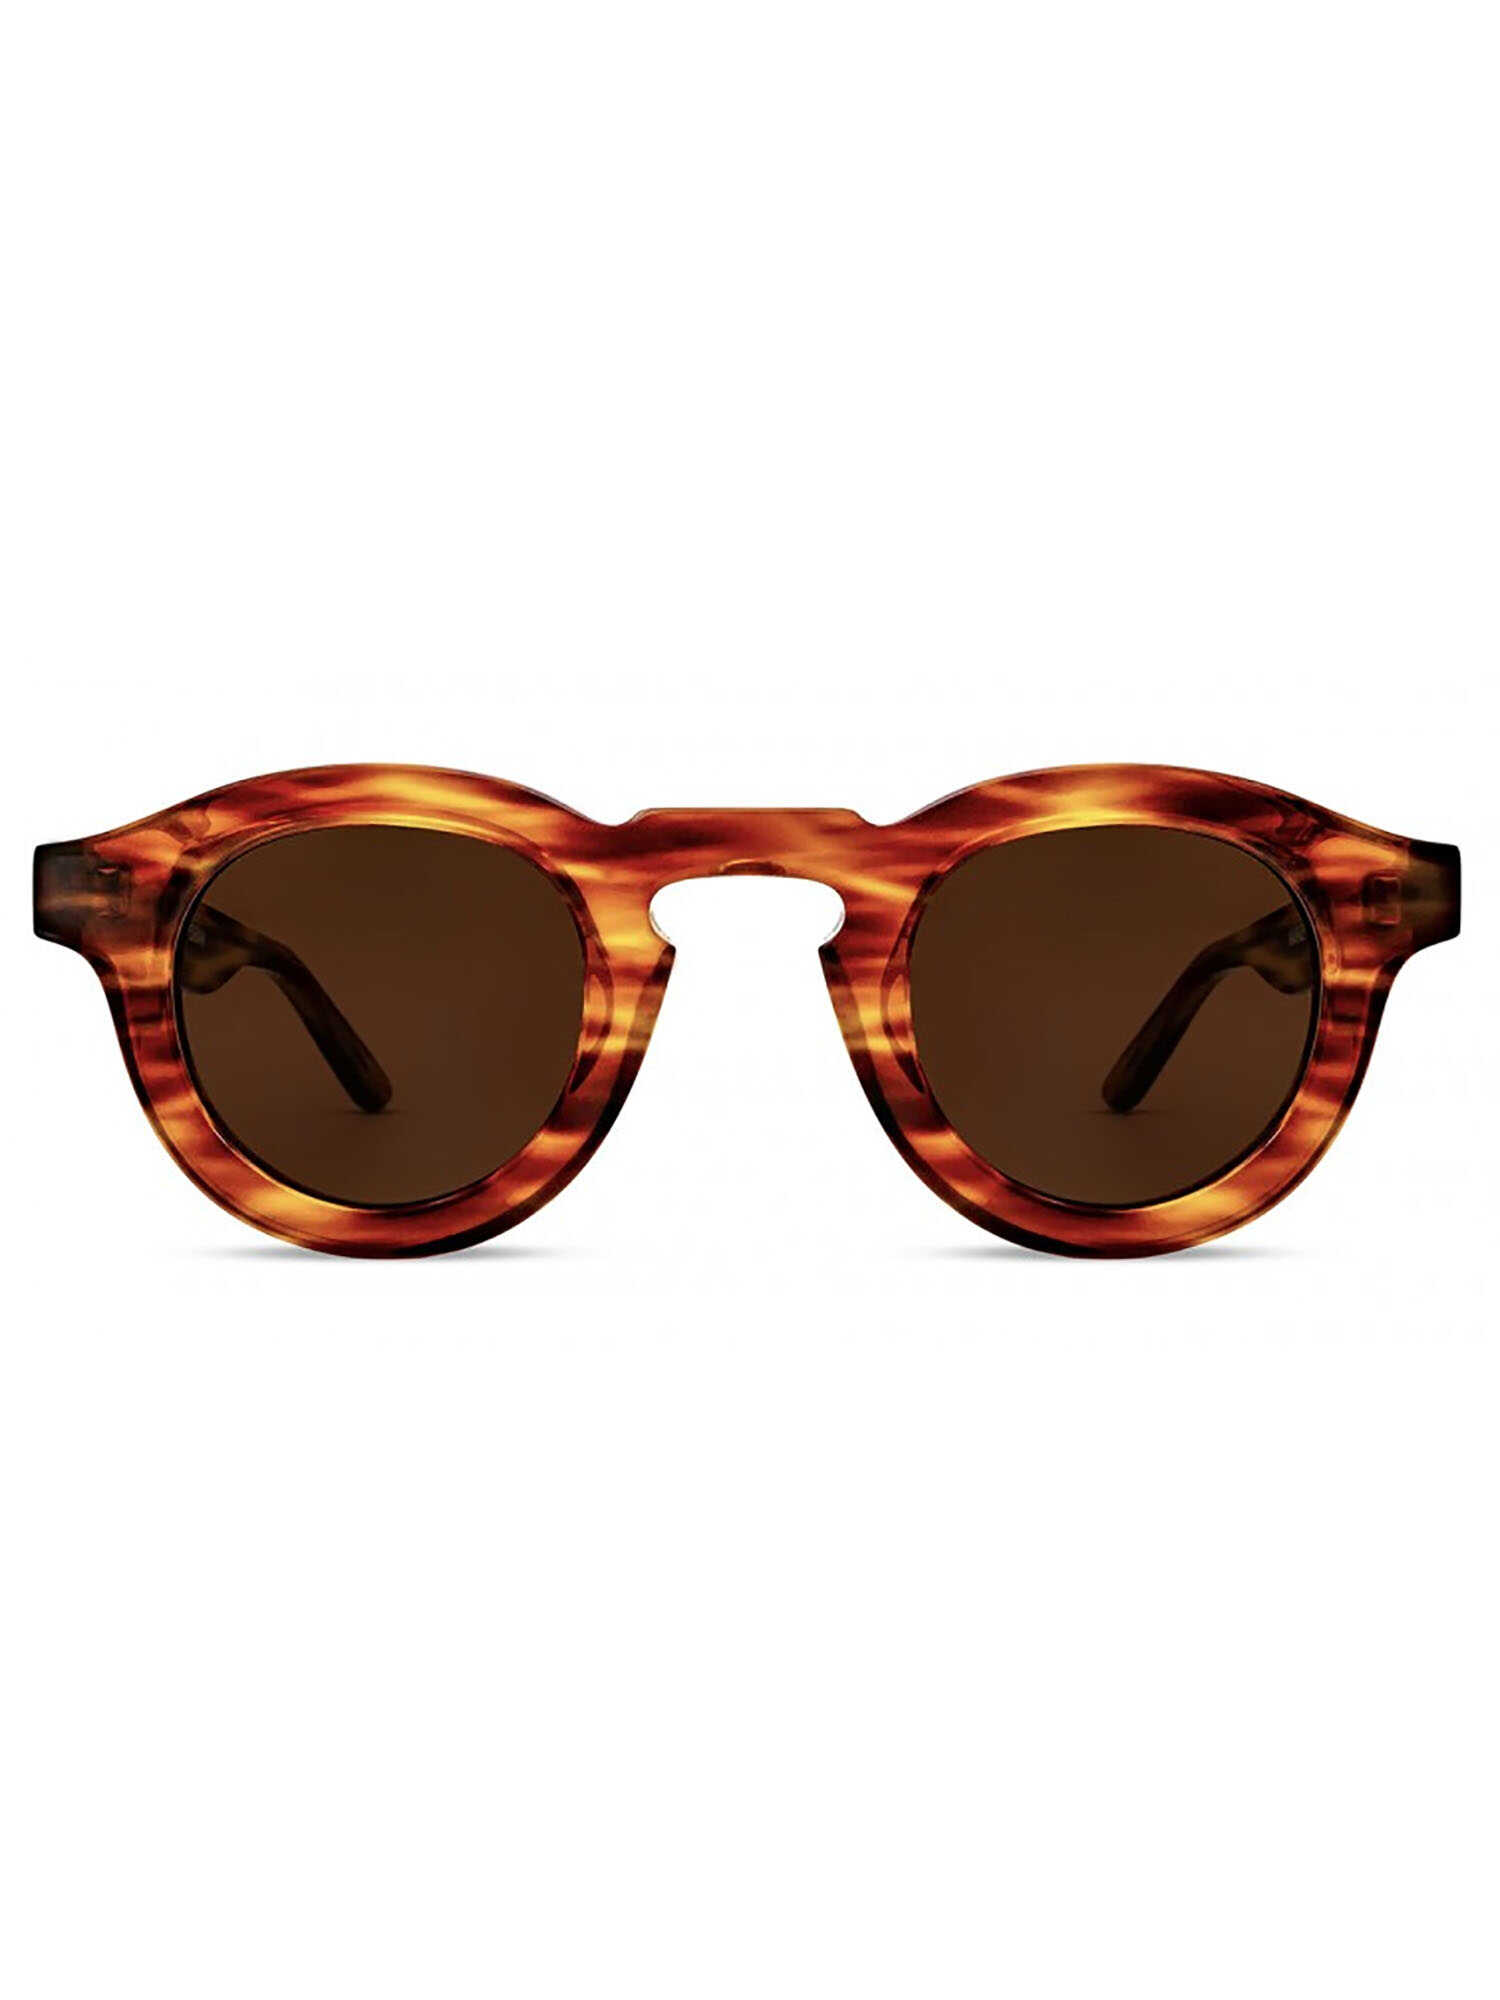 THIERRY LASRY Thierry Lasry MASKOFFY Brown